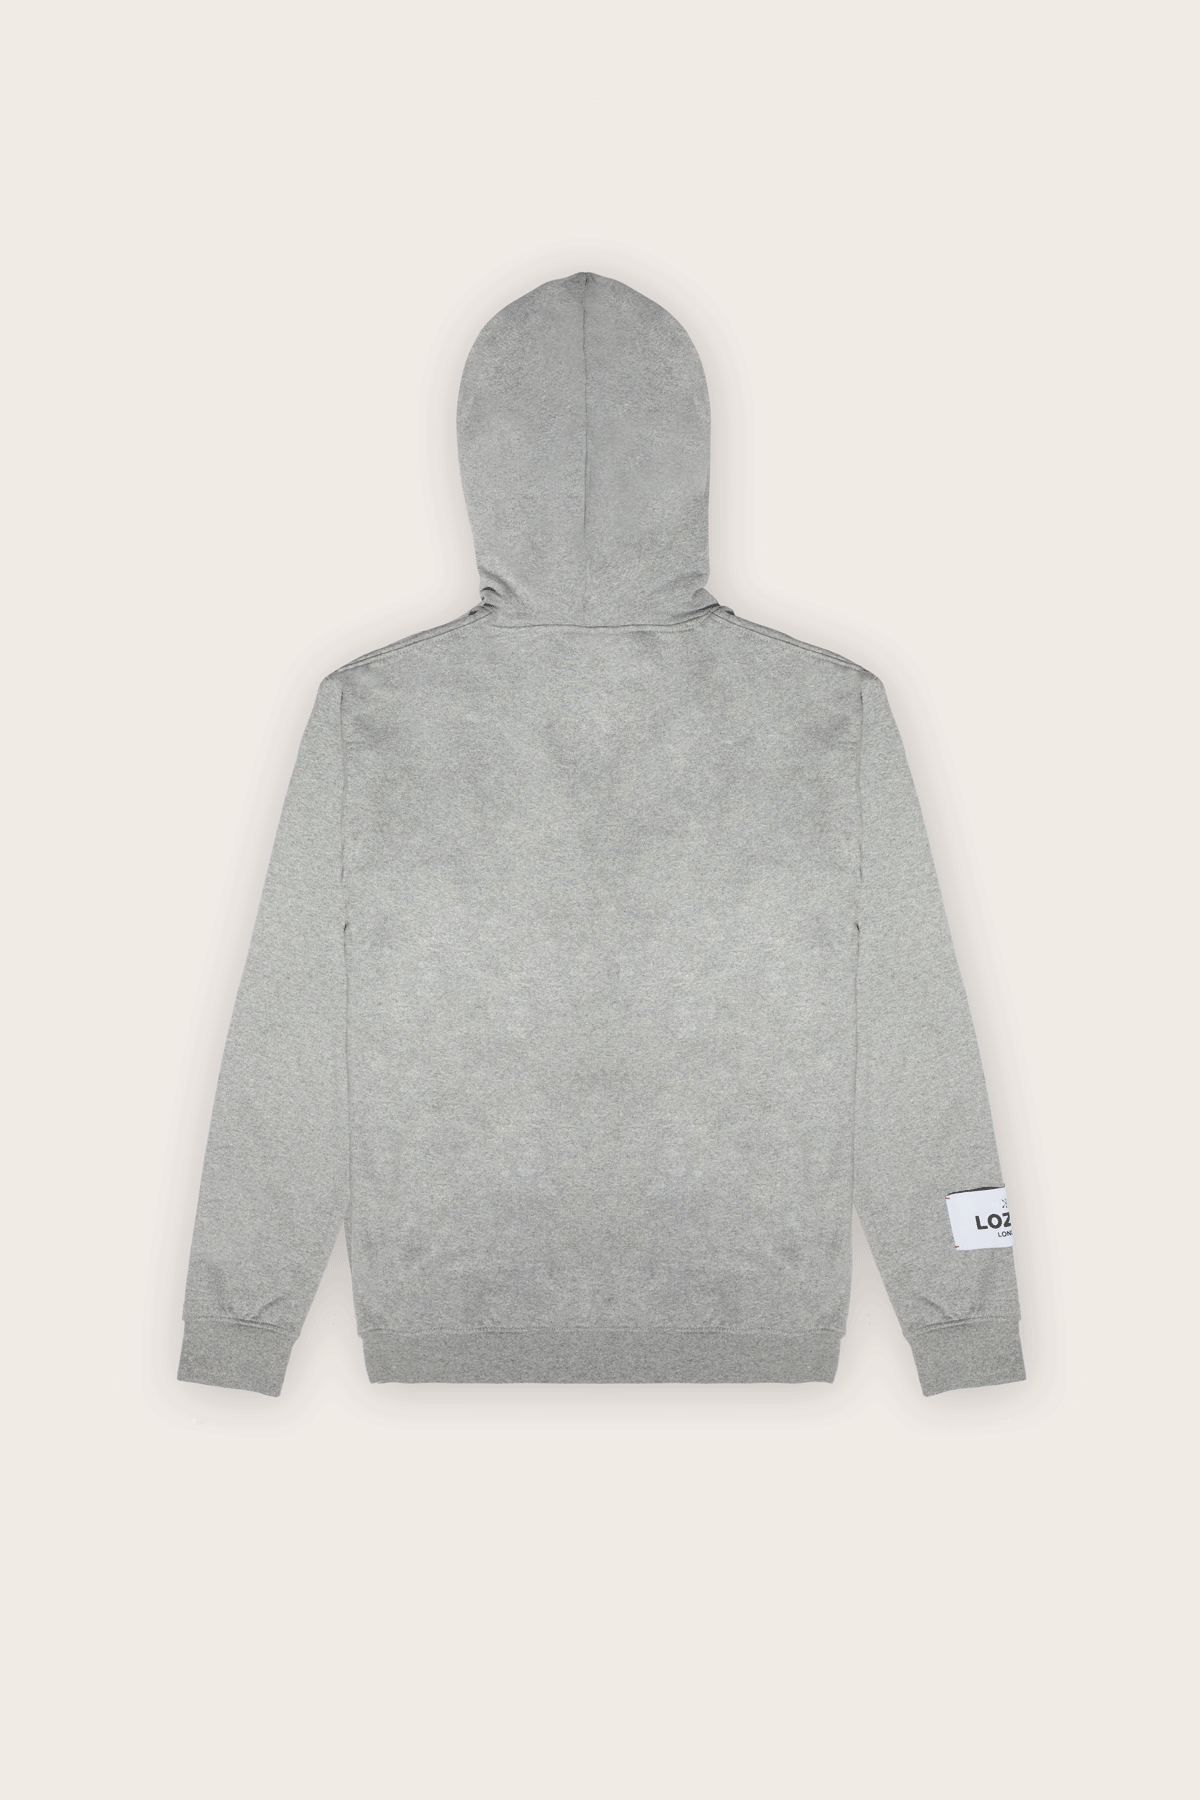 Recycled Cotton Hoody - Grey back